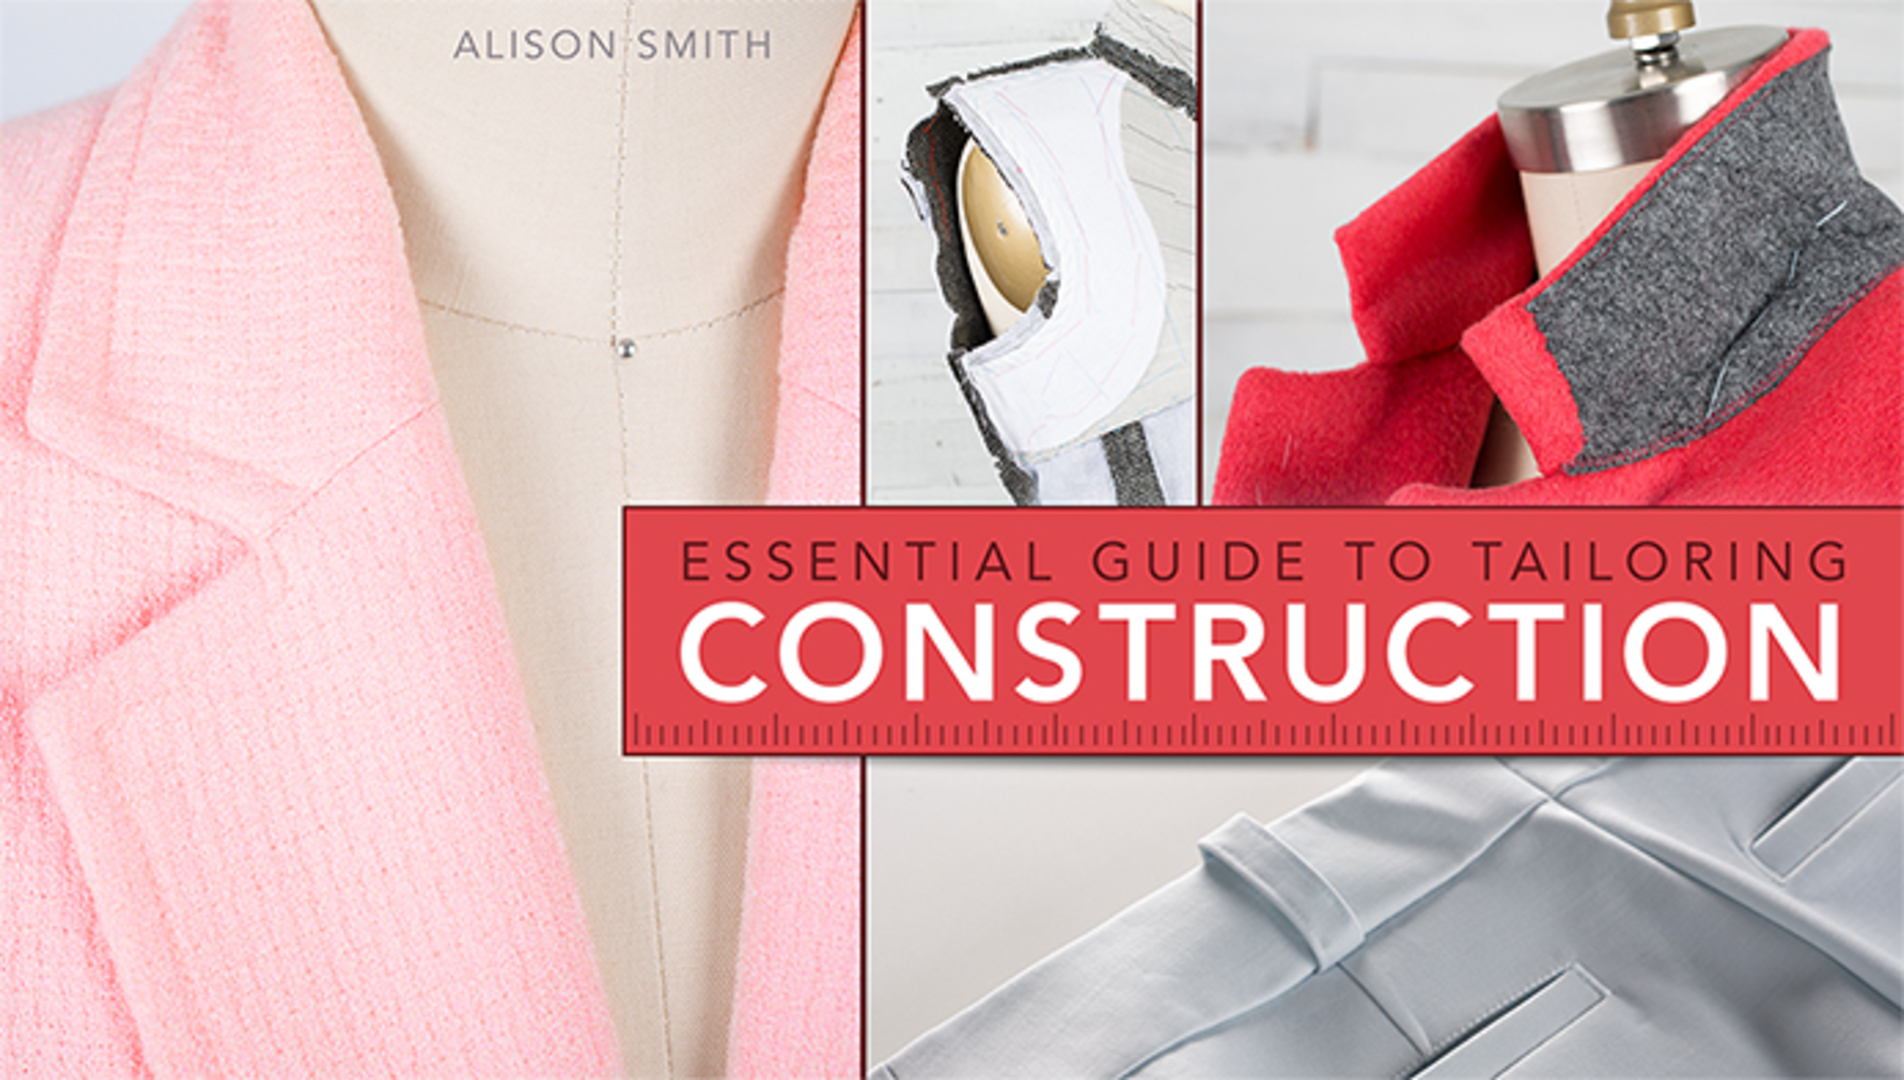 Book Review: Dressmaking by Alison Smith